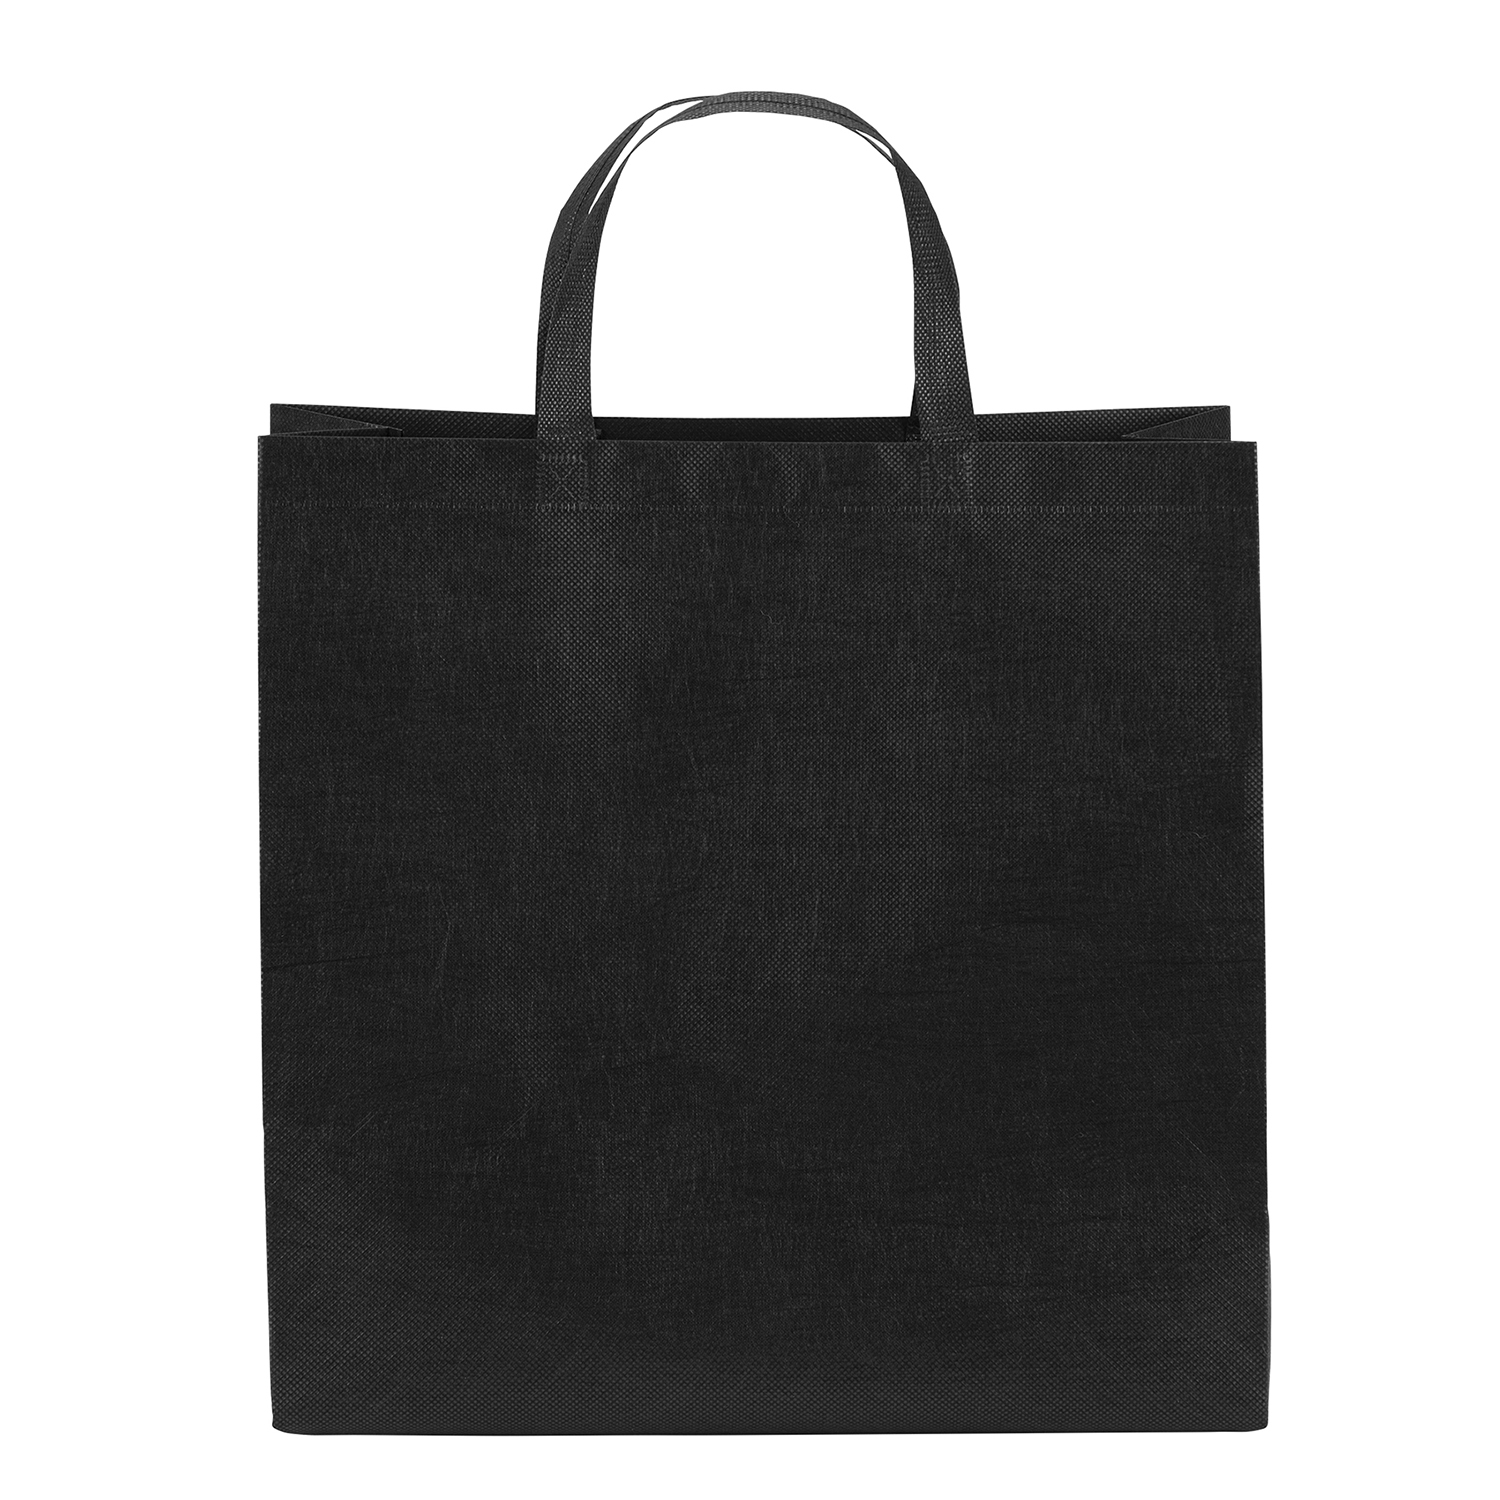 Bag Makers SPOC1515 - Custom Printed Eco-Friendly Promotional Non-Woven Grocery Tote Bag